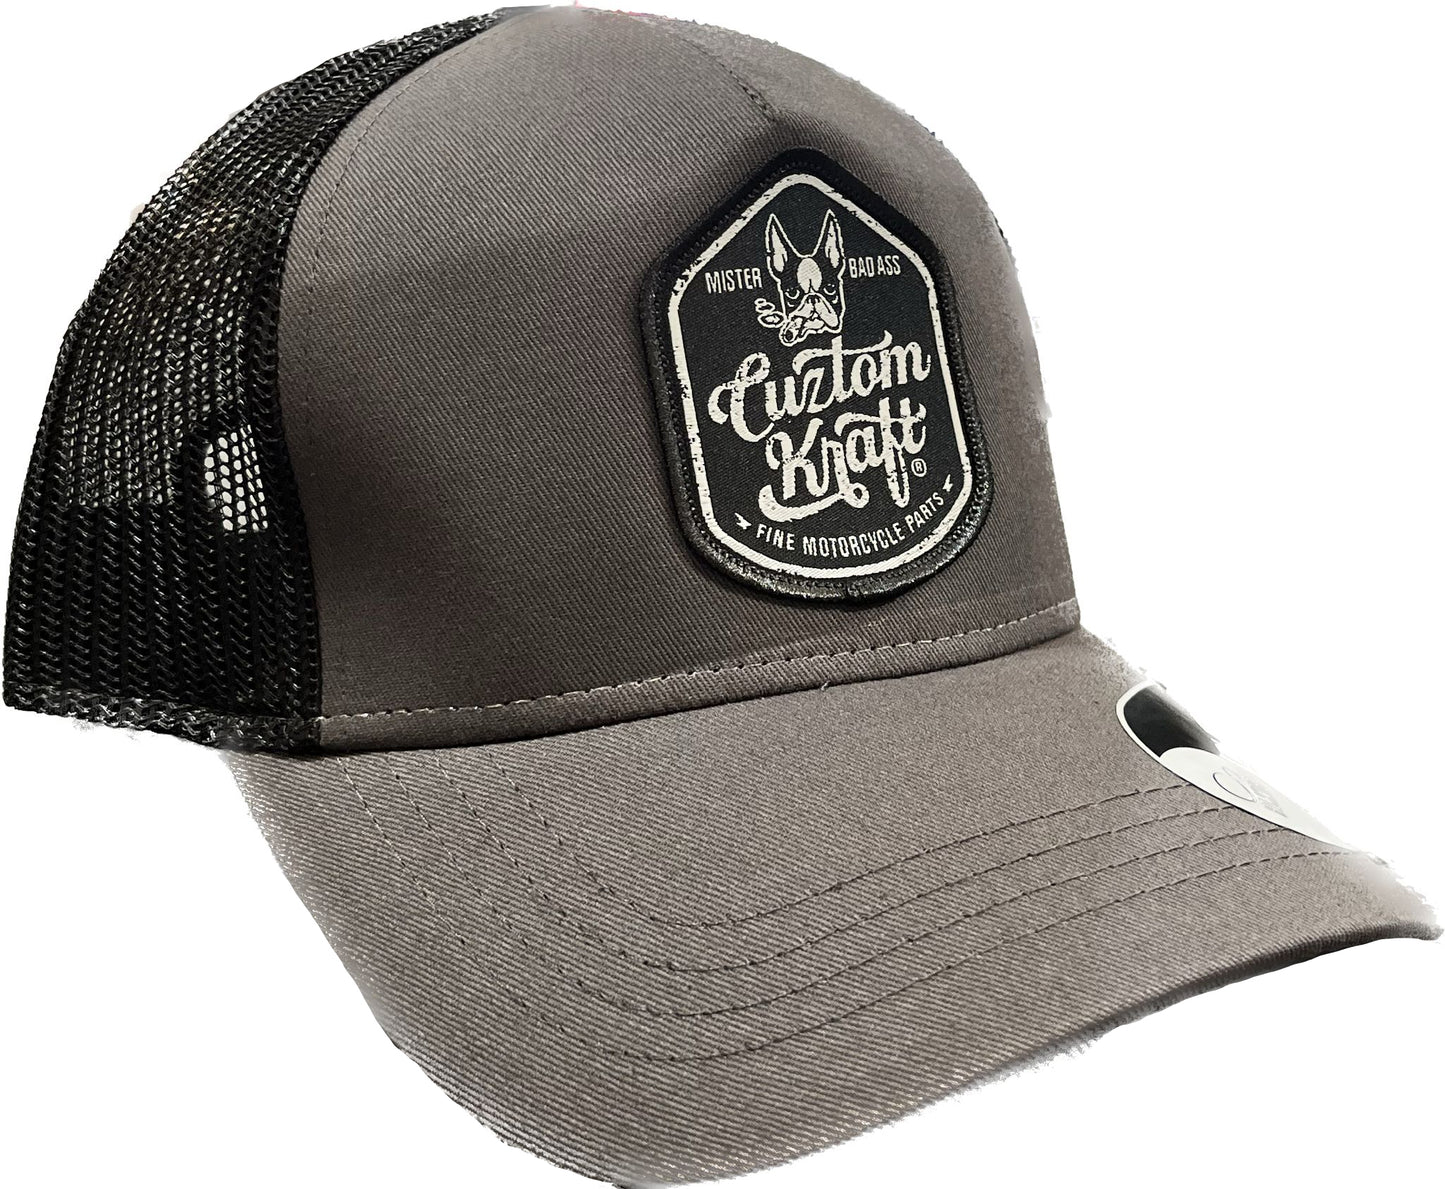 A gray trucker hat with a black Bad Ass Patch on it made by Cuztom Kraft.